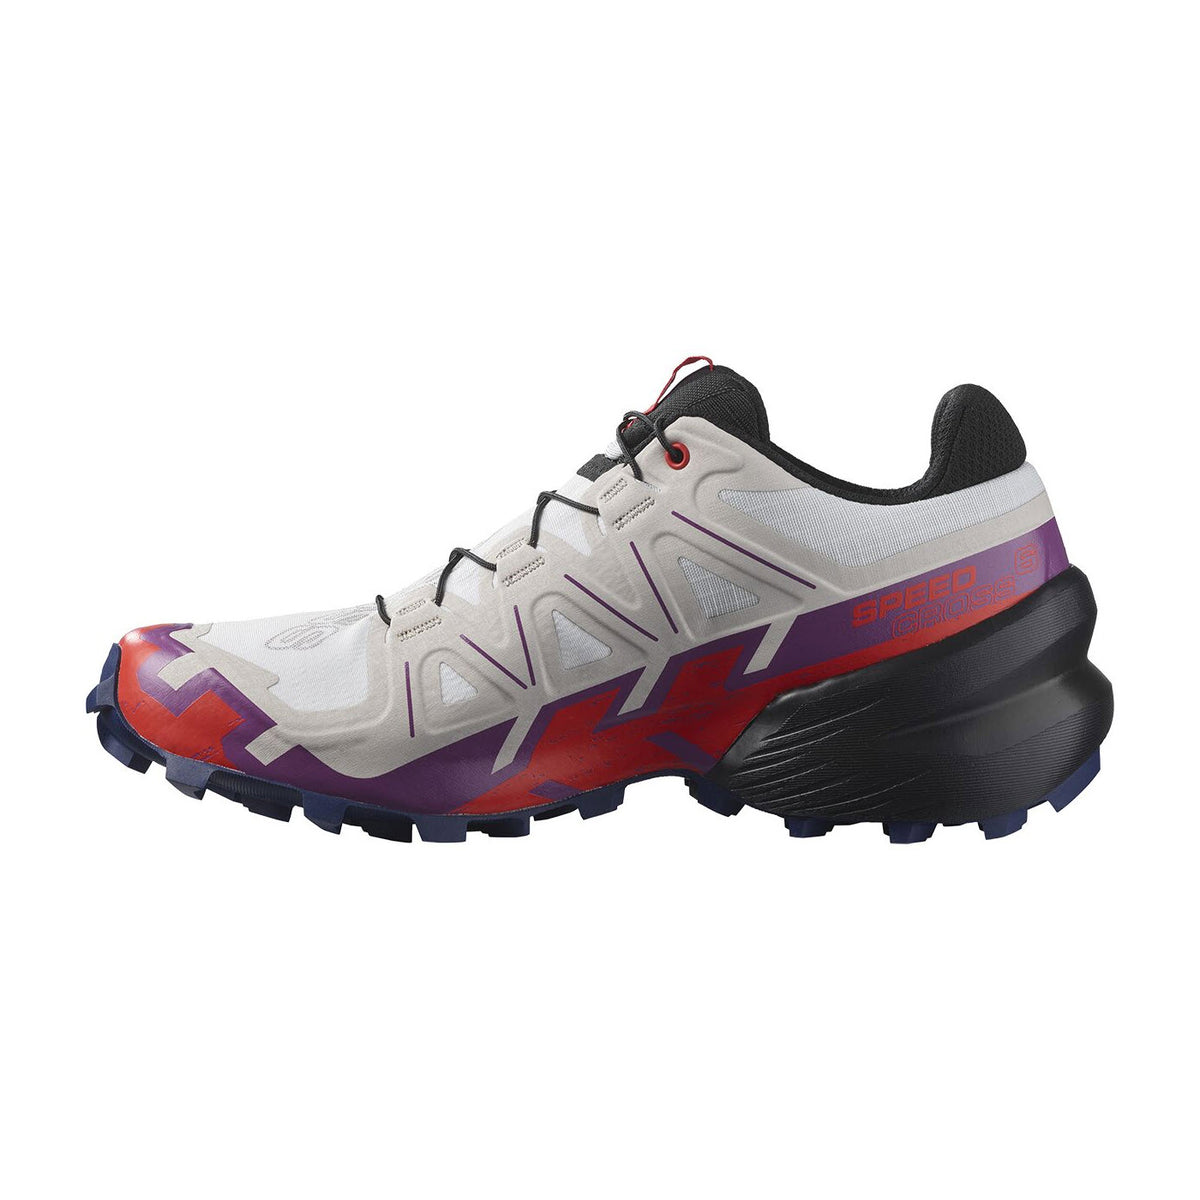 A single white Salomon SPEEDCROSS 6 trail running shoe with purple and red accents, featuring a rugged sole and quick lace system.